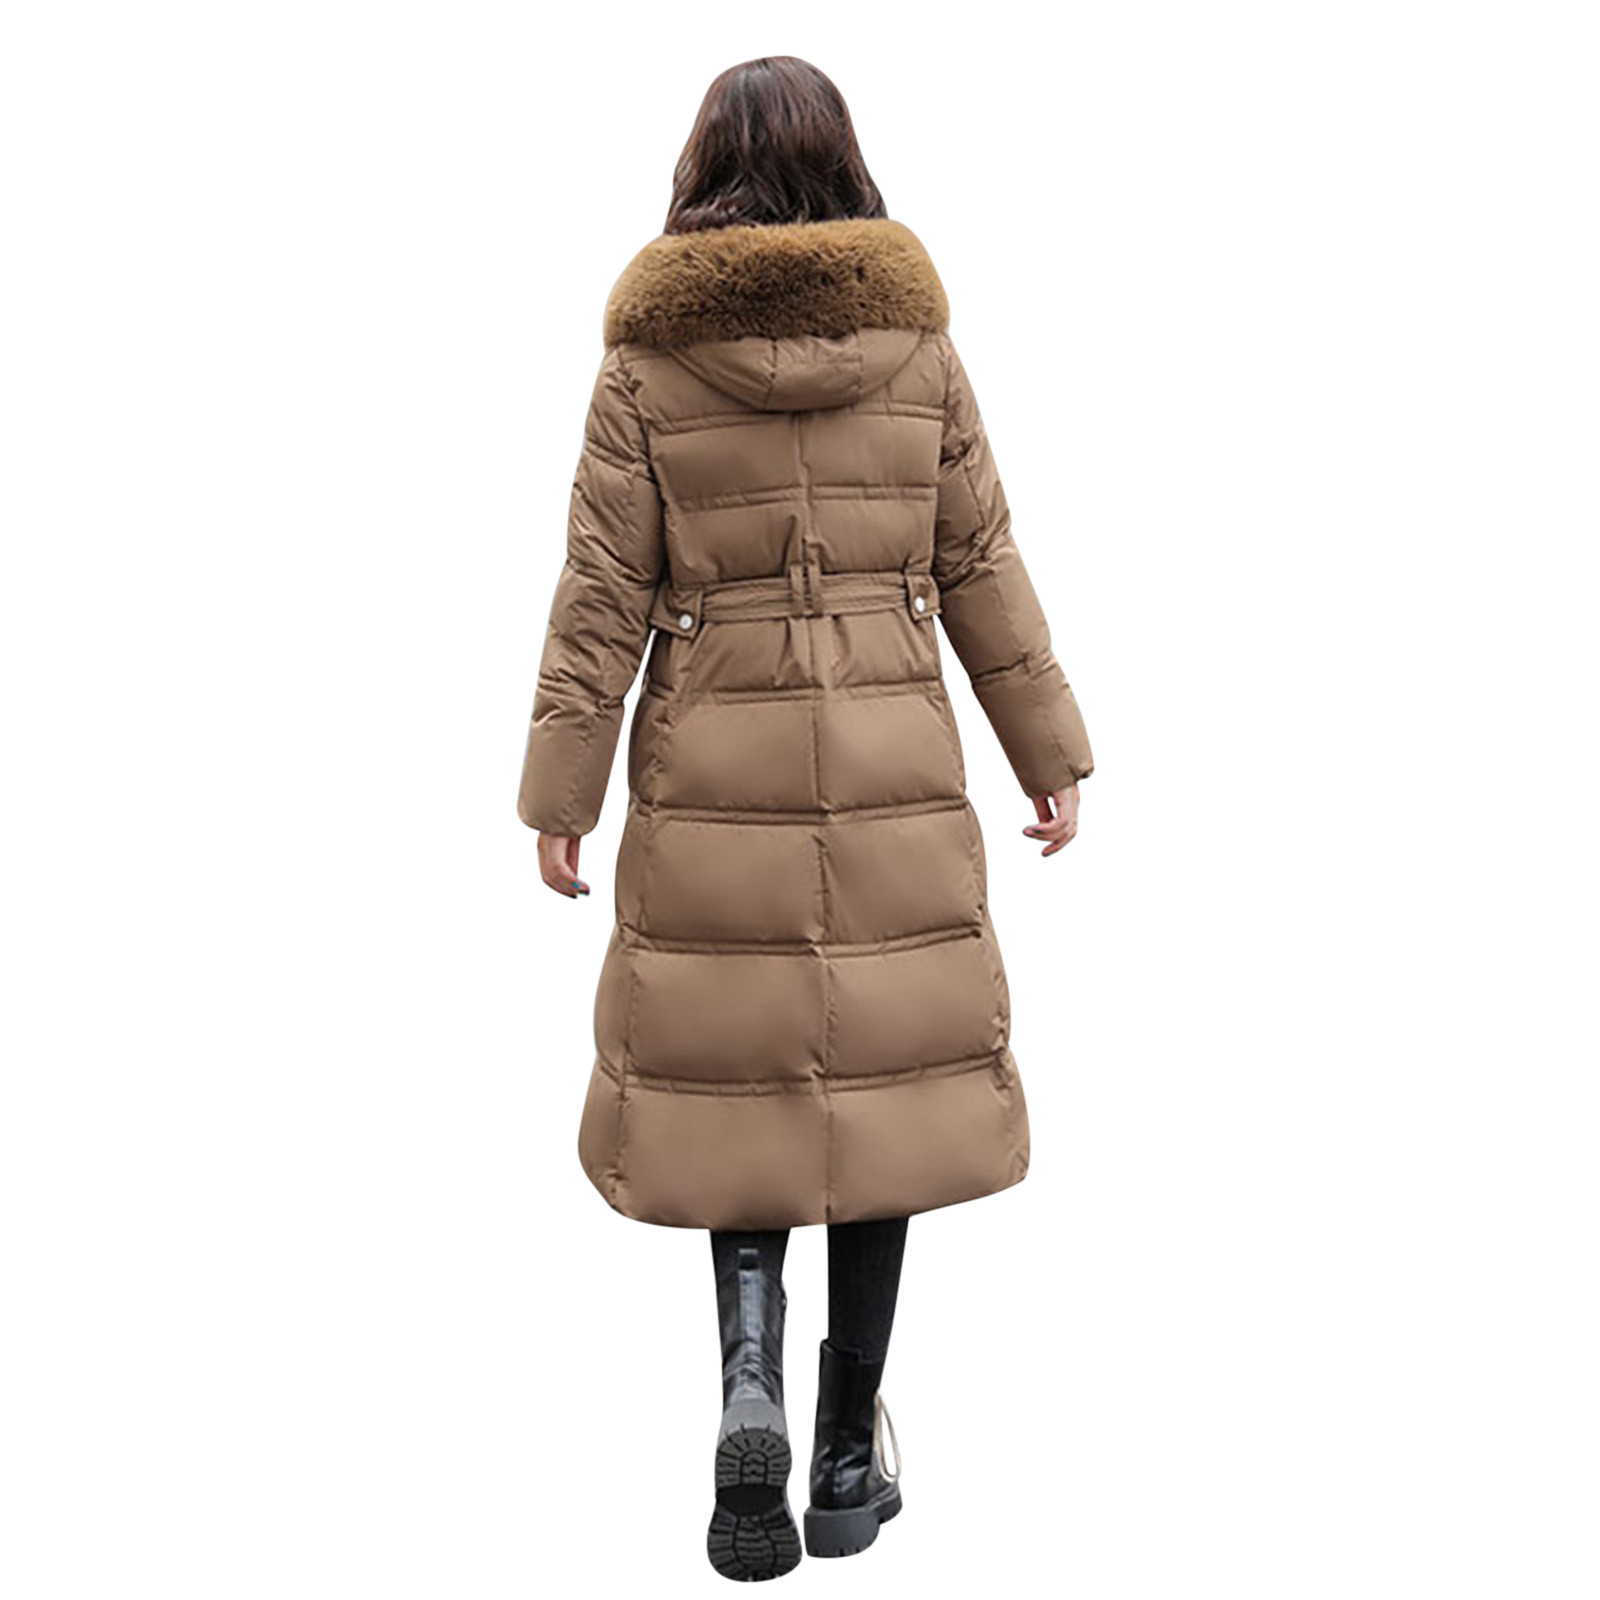 vbnergoie Womens Warm Winter Coat Thicken Cotton Jacket Quilted With Artificial Fur-grass Trimmed Hooded Max Co Coat Womens Green - image 4 of 8